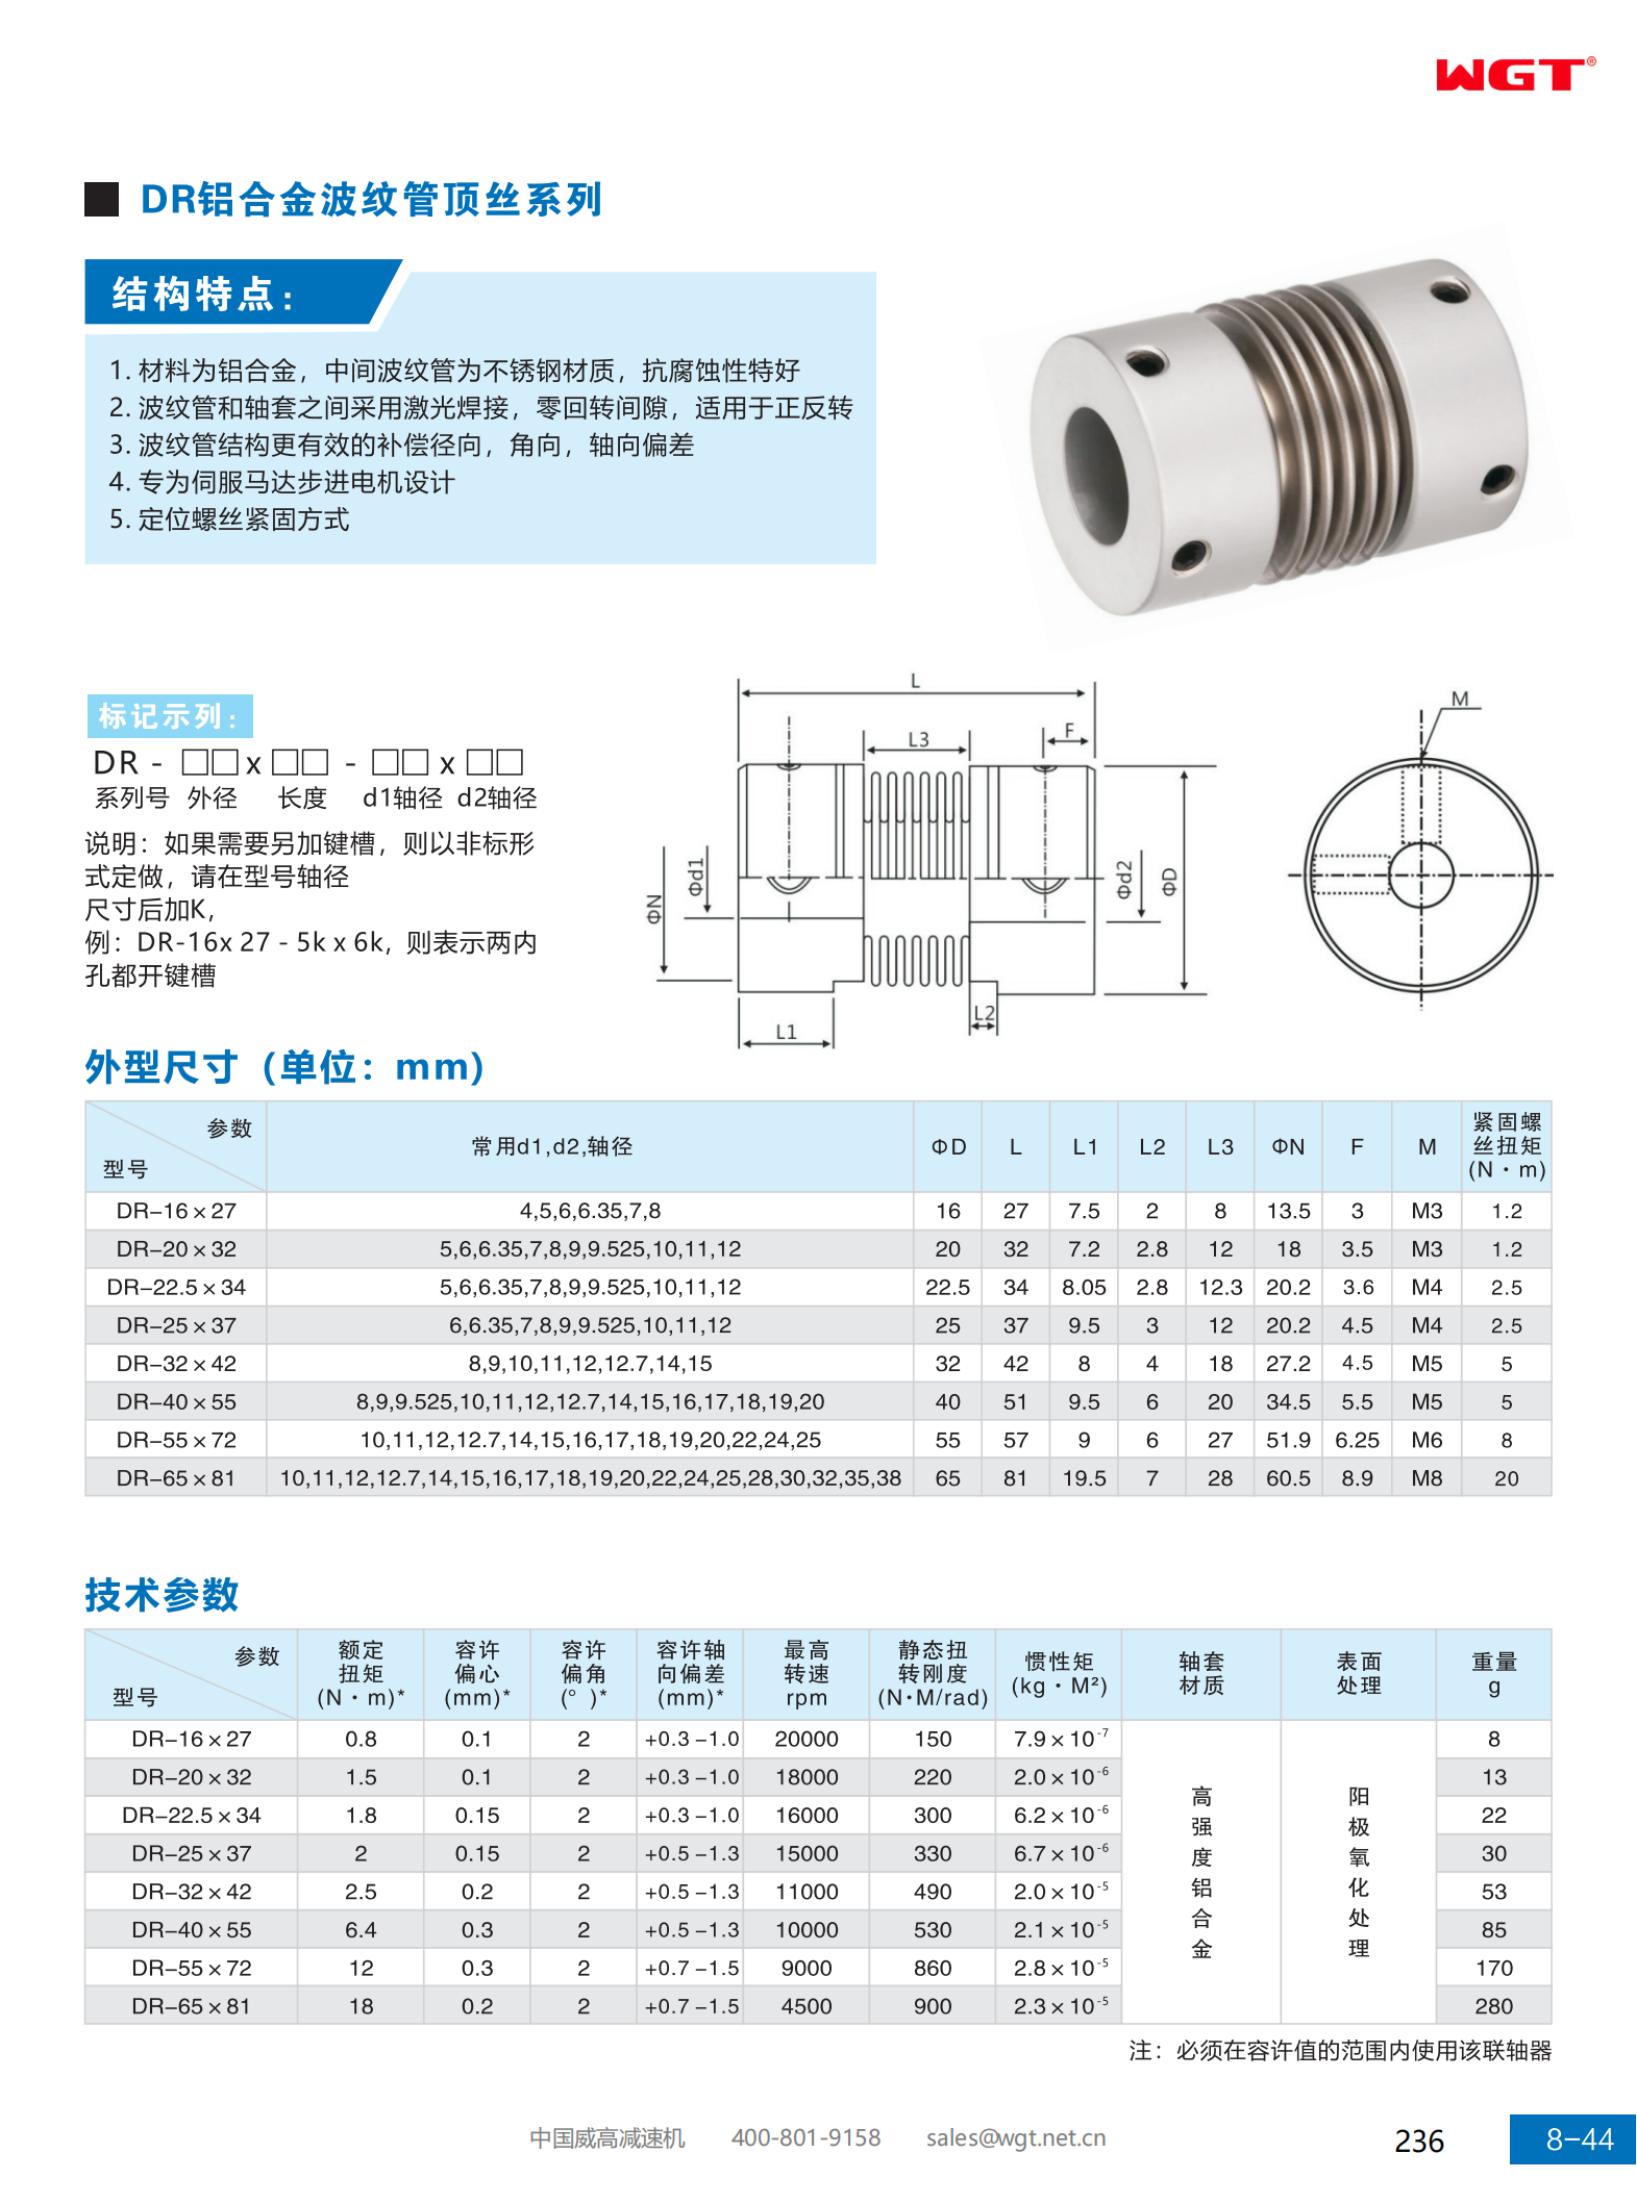 DR aluminum alloy bellows top wire series